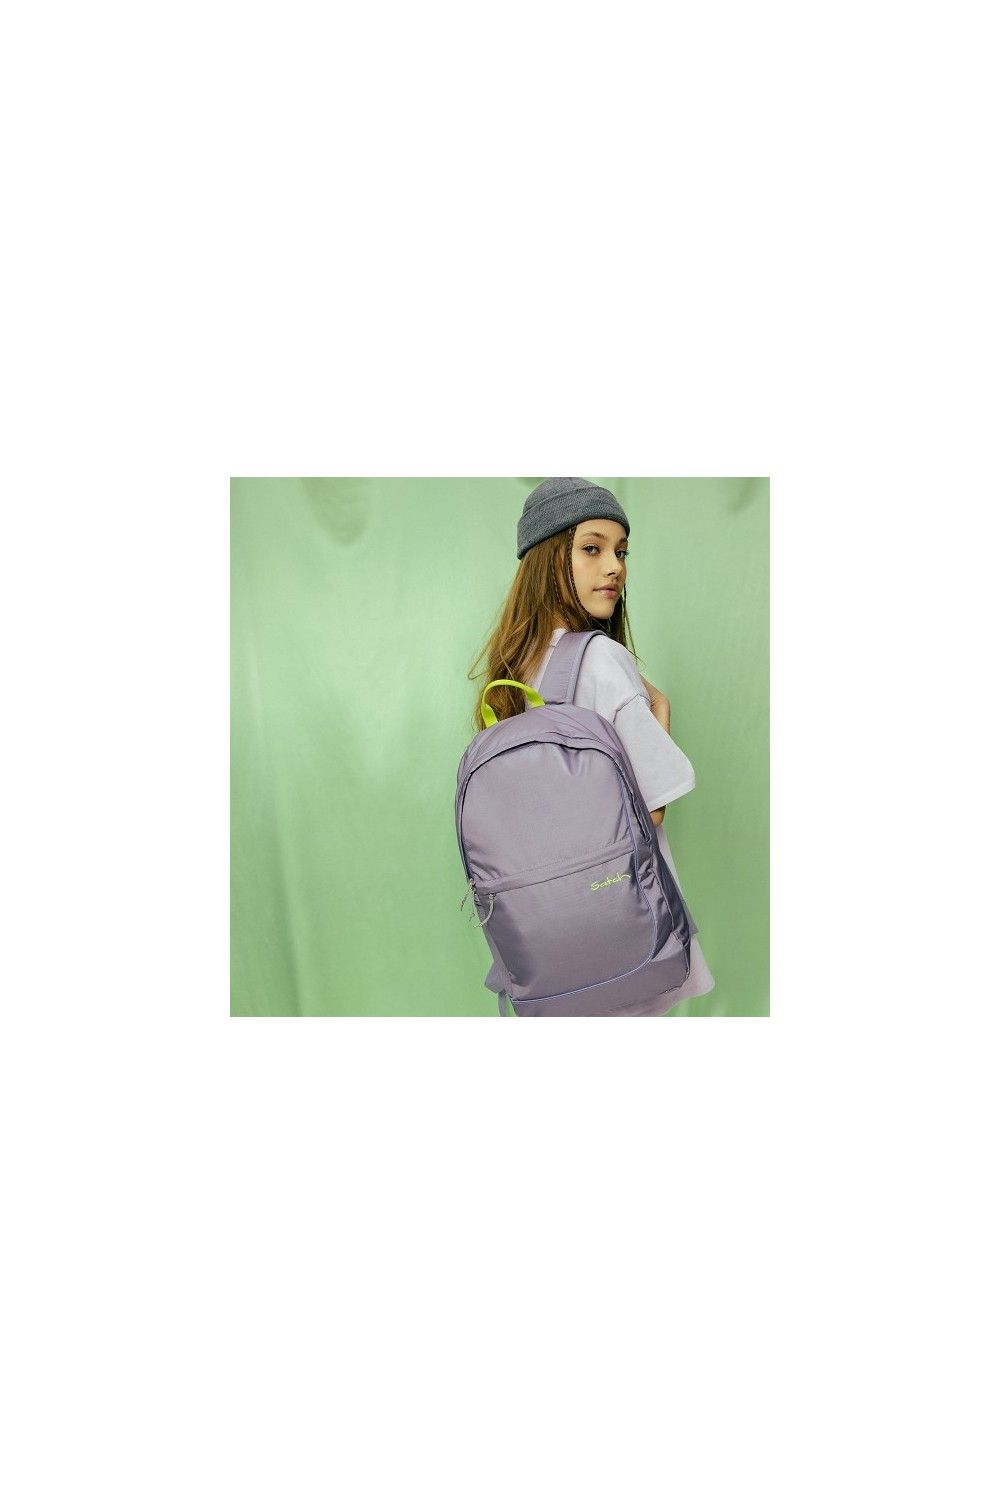 Satch Fly Rucksack Ripstop Lilac